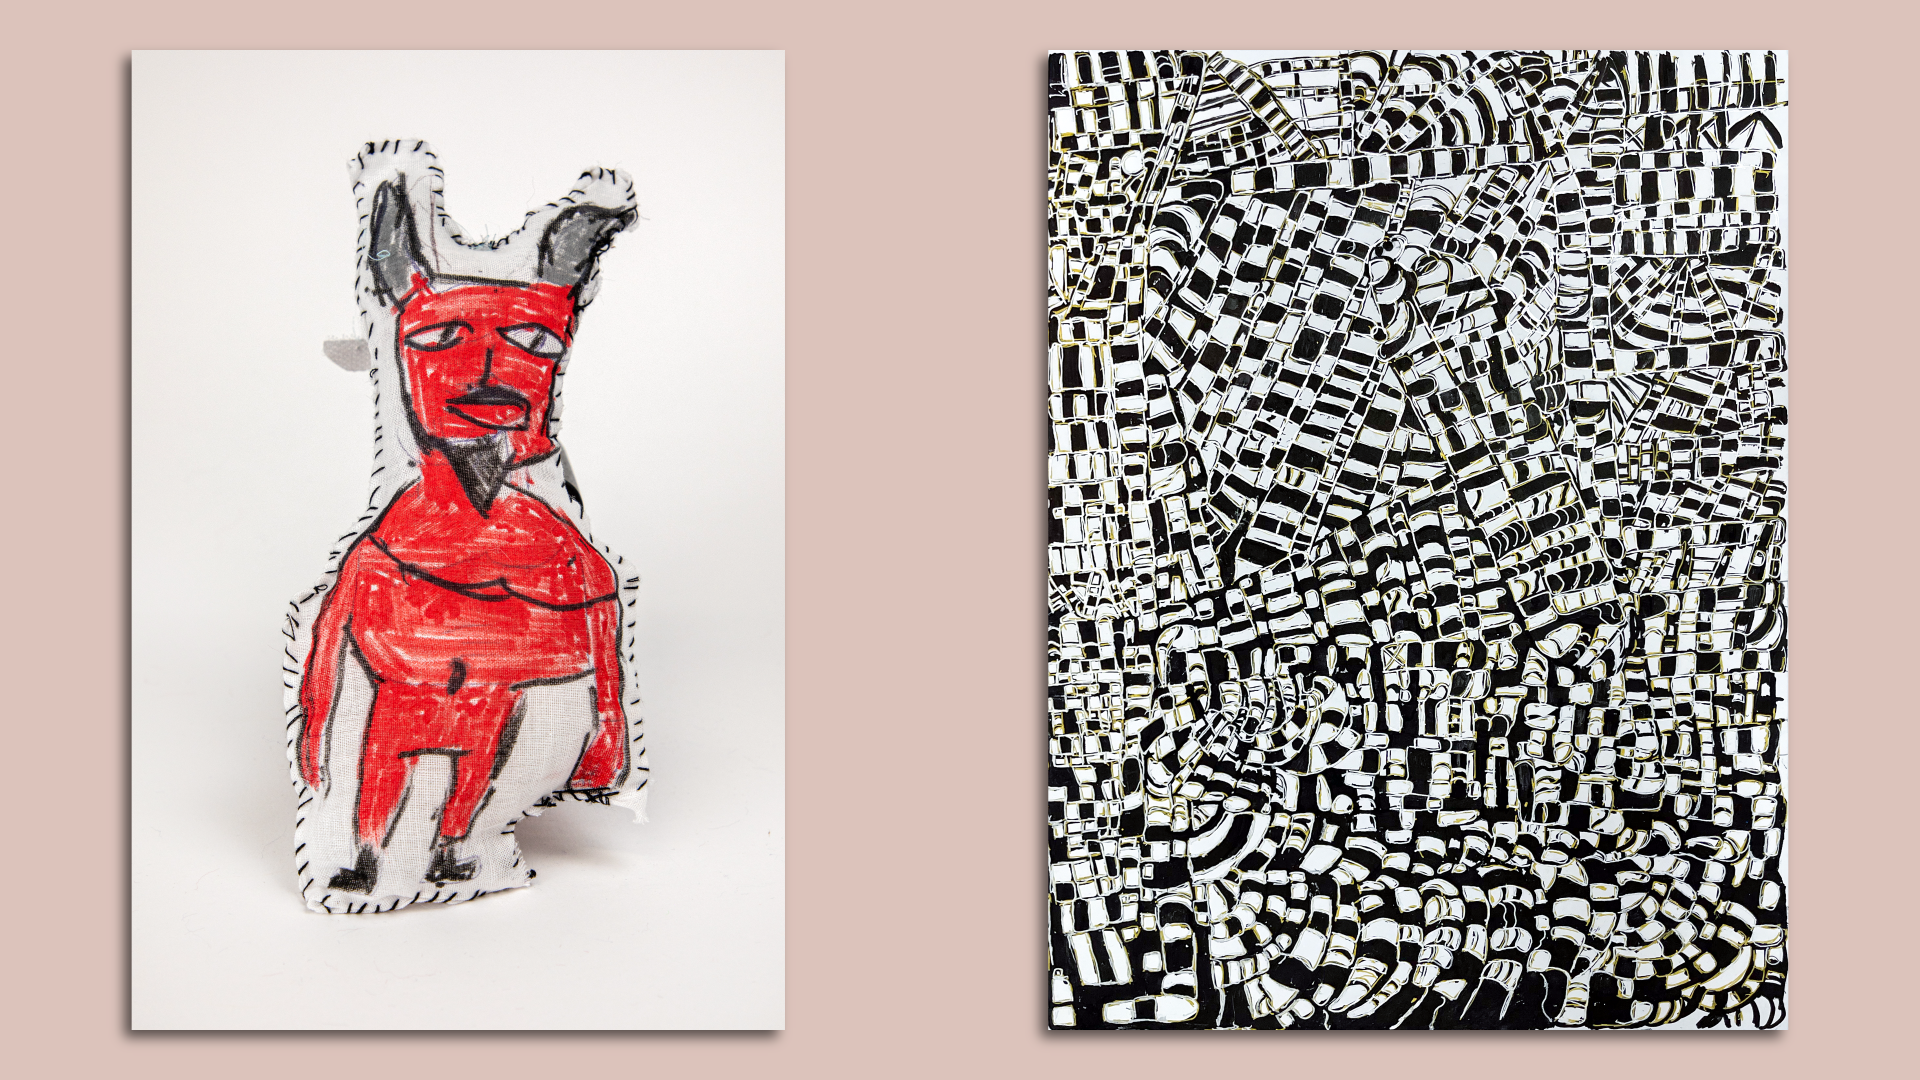 A small figure of a red devil with horns and a beard on the left. A black and white maze-like piece of art that appears abstract on the right.